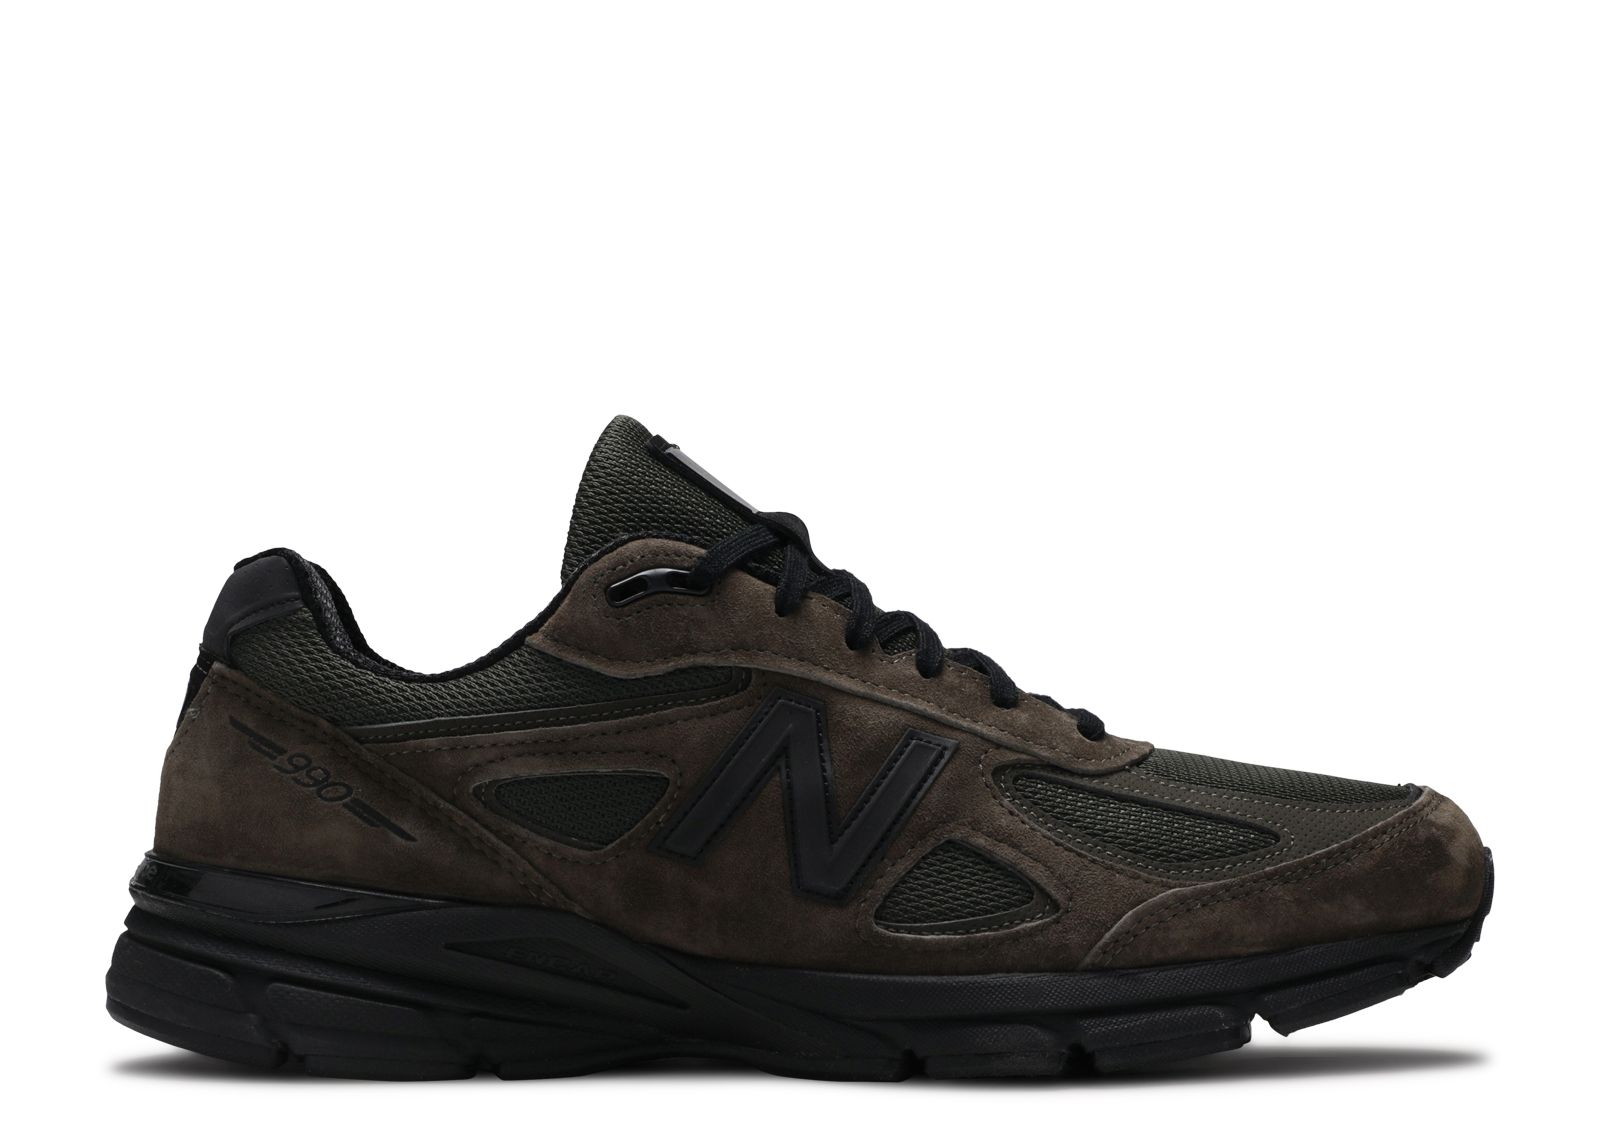 990v4 Made In USA 'Military Green' - New Balance - M990MG4 - military ...